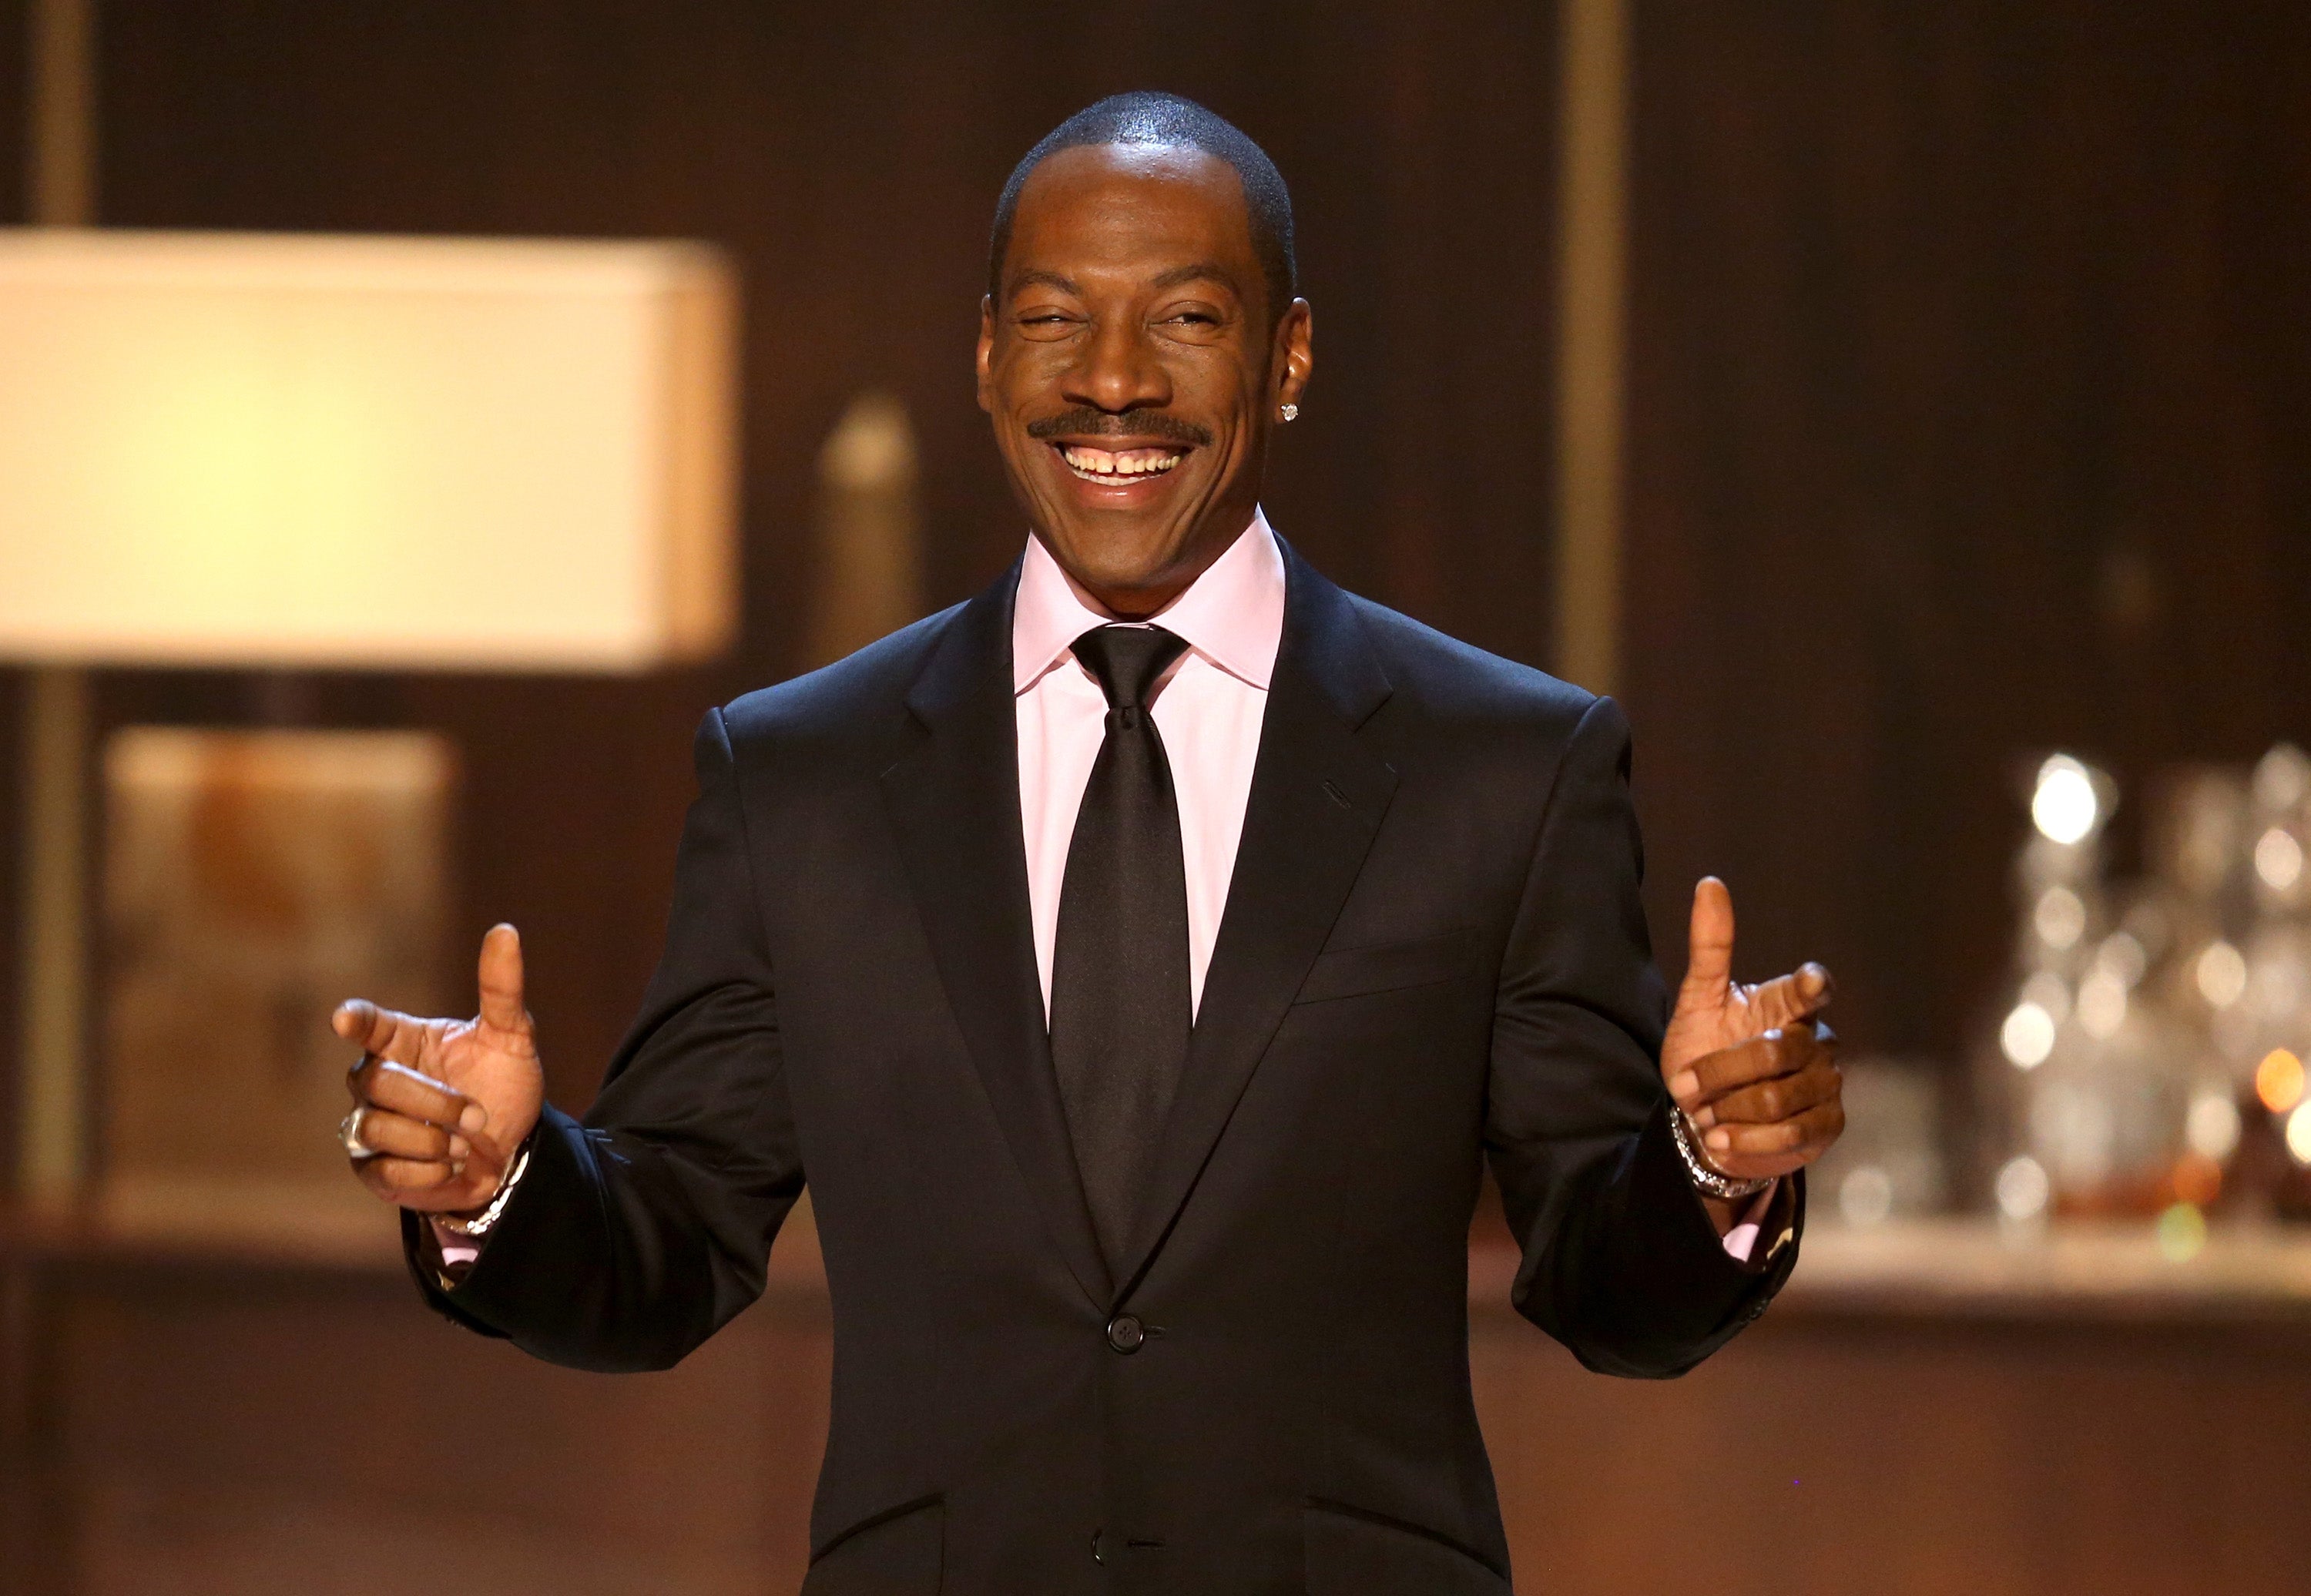 Eddie Murphy Played With Our Emotions By Teasing 'Coming To America' Sequel